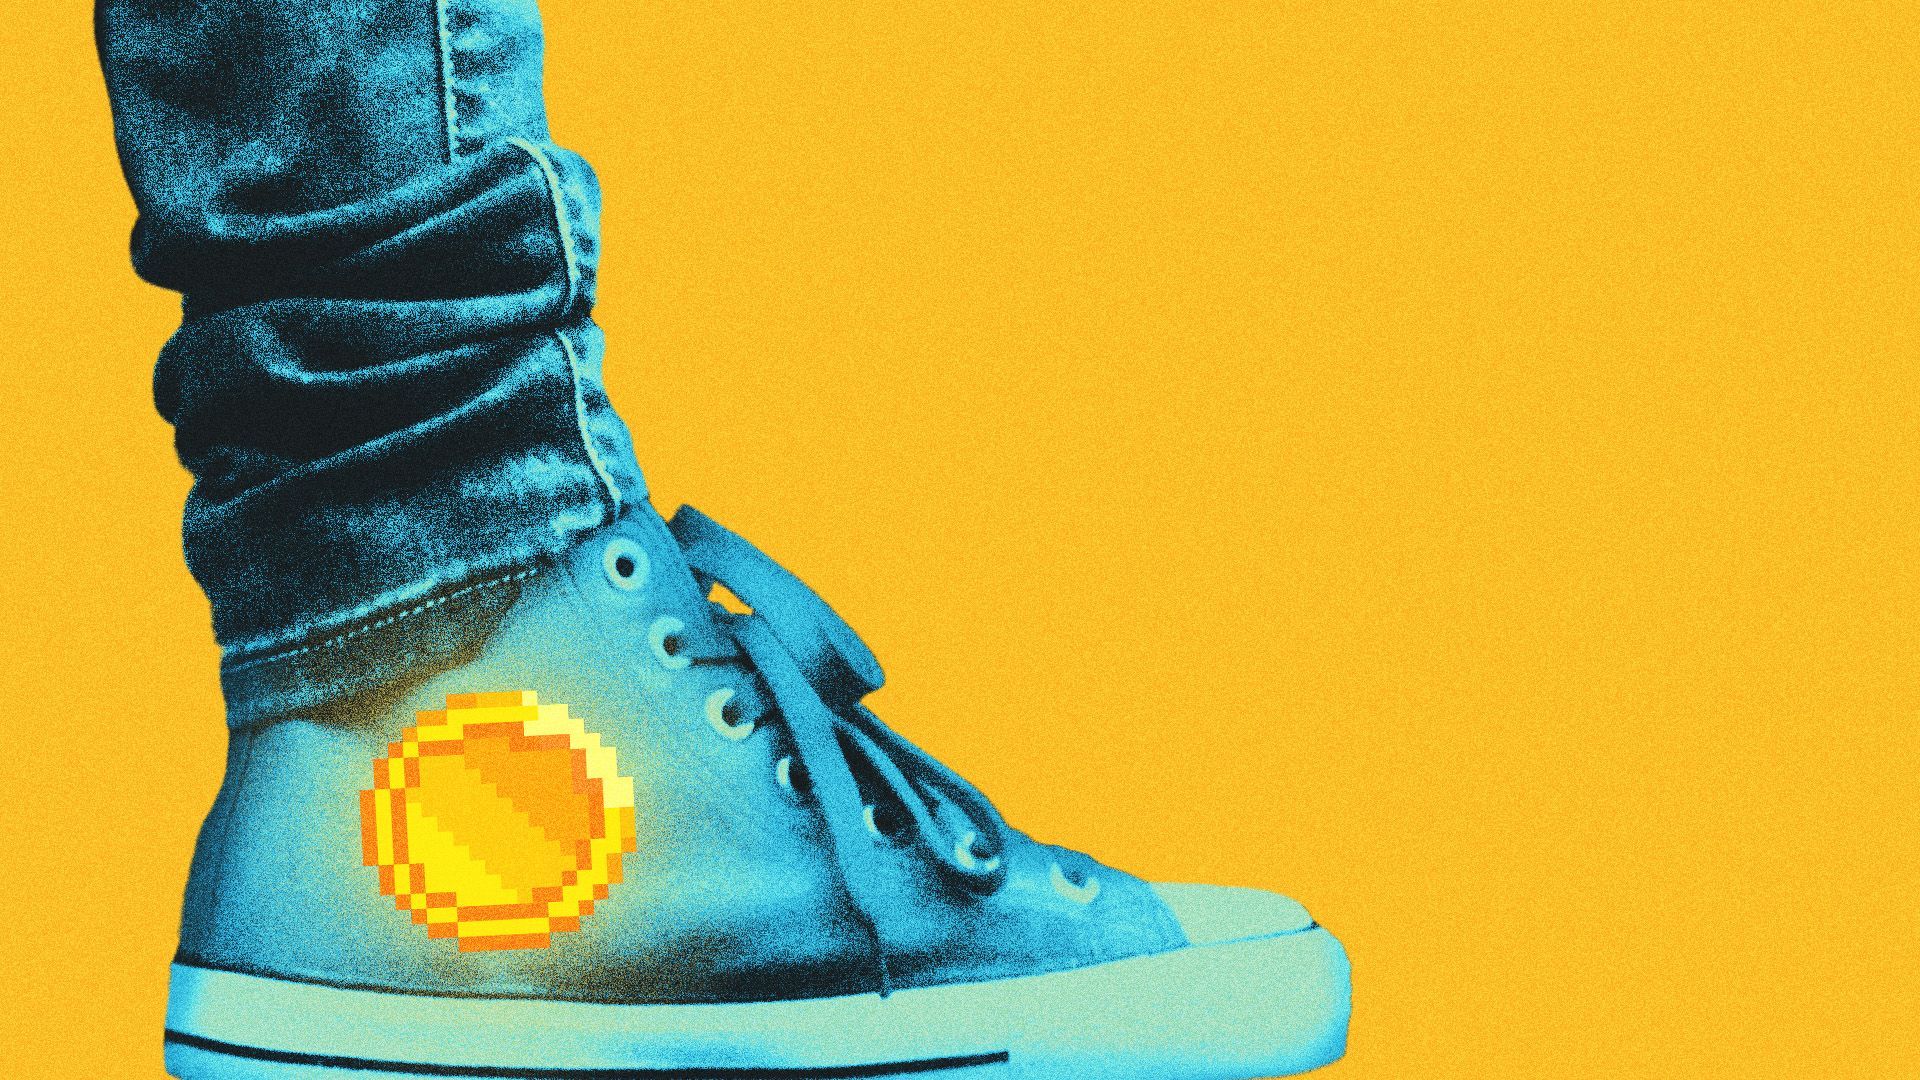 Illustration of a high top sneaker with a gold pixelated coin as the logo.